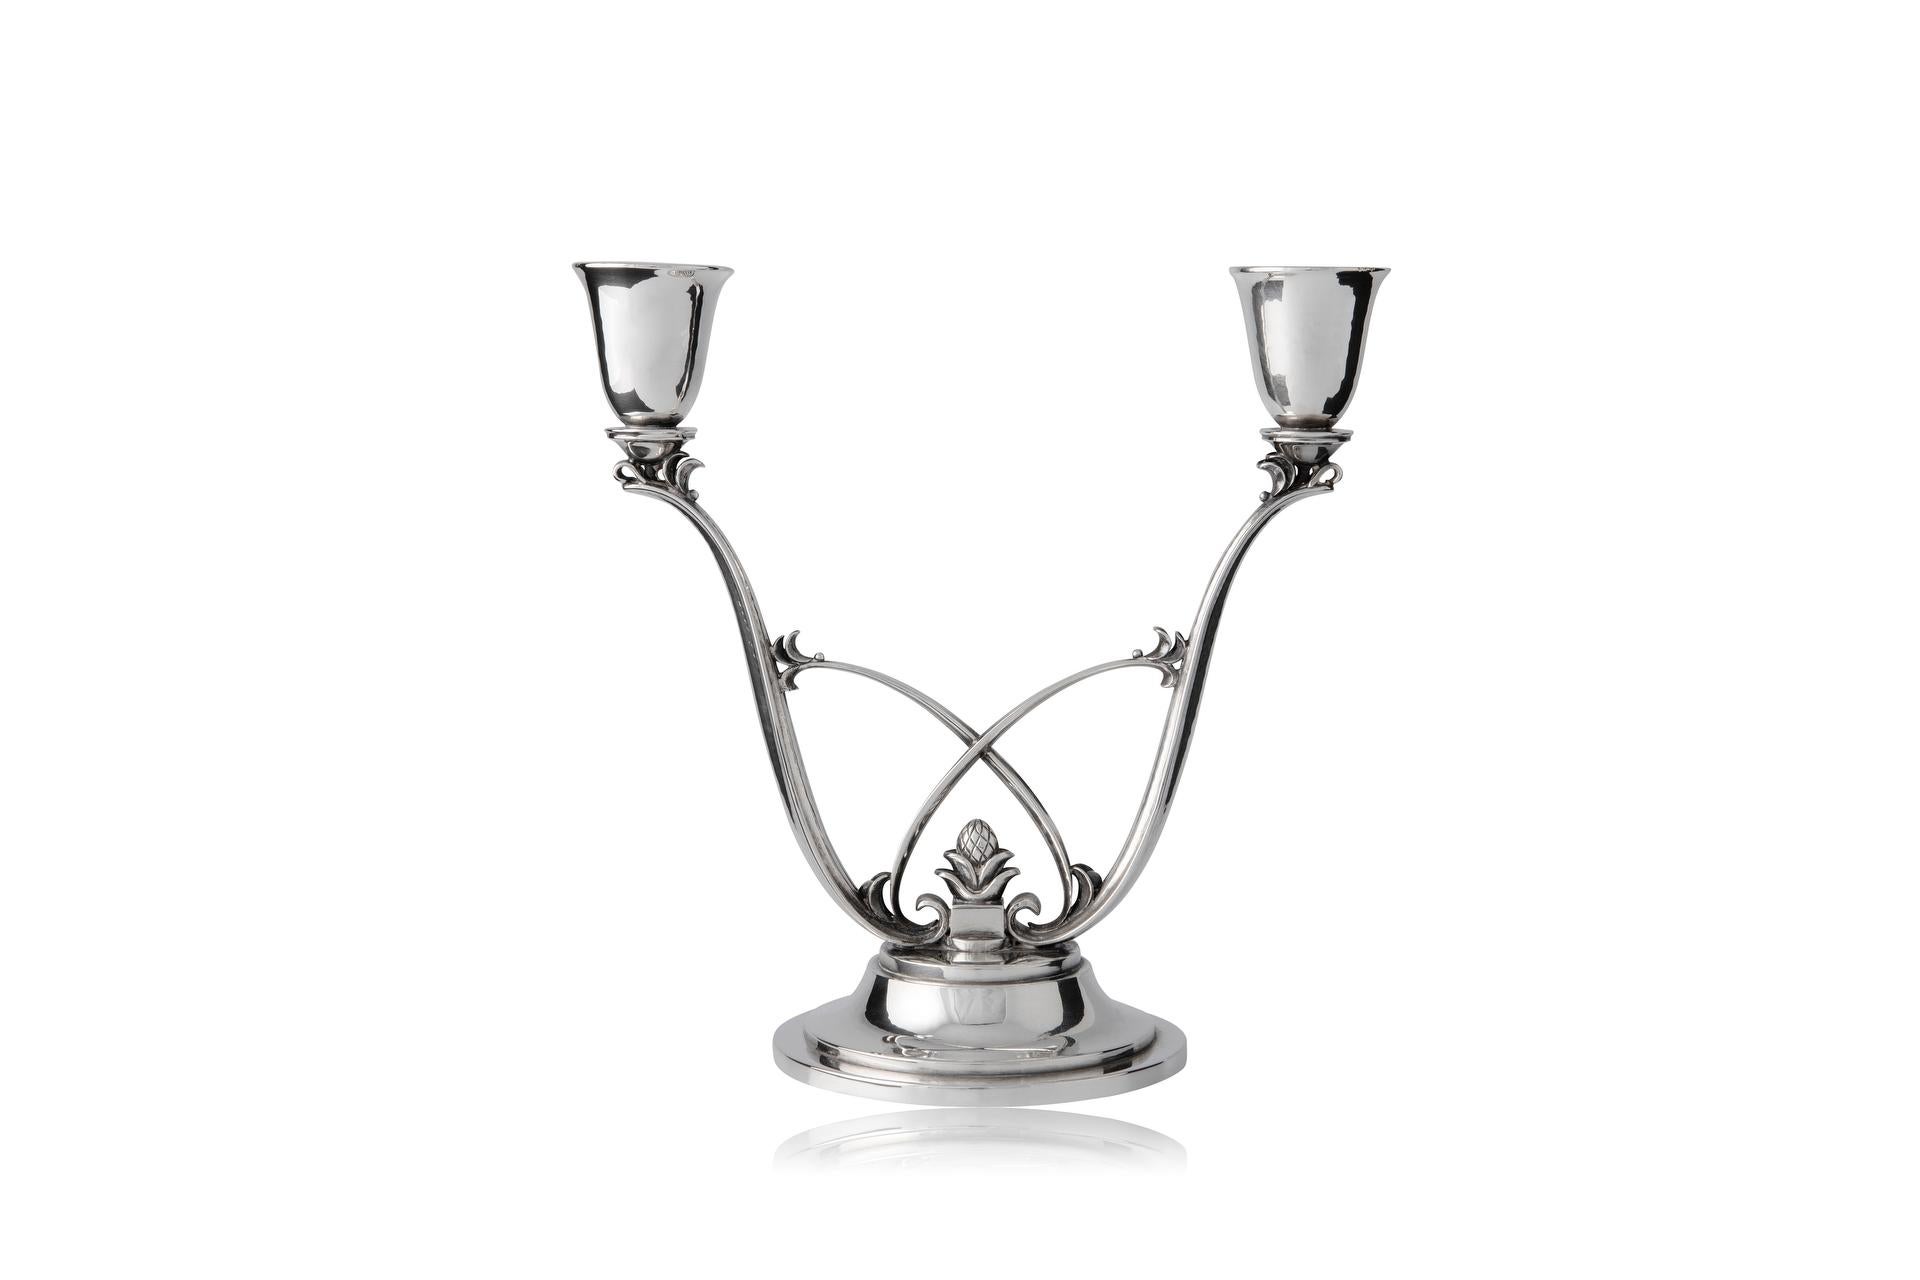 A pair of vintage Georg Jensen sterling silver two-light candelabra, design #619 by Harald Nielsen from circa 1930.

Additional information:
Material: Sterling silver
Styles: Art Deco
Hallmarks: Vintage Georg Jensen hallmarks from